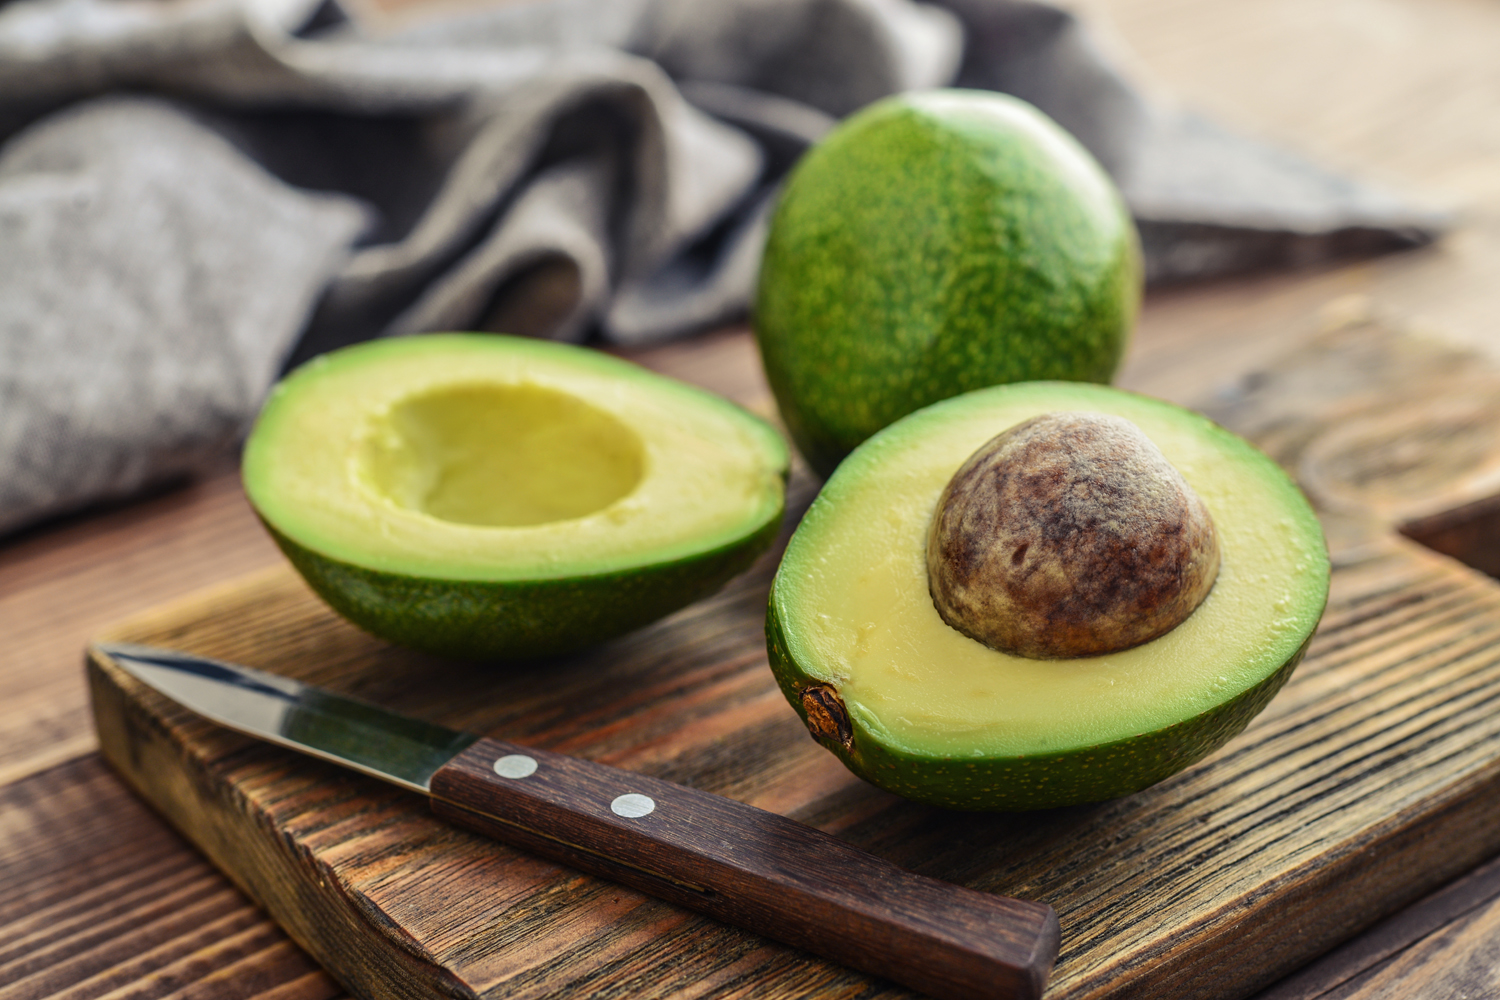 A sliced avocado and whole avocado with knife on a wooden cutting board